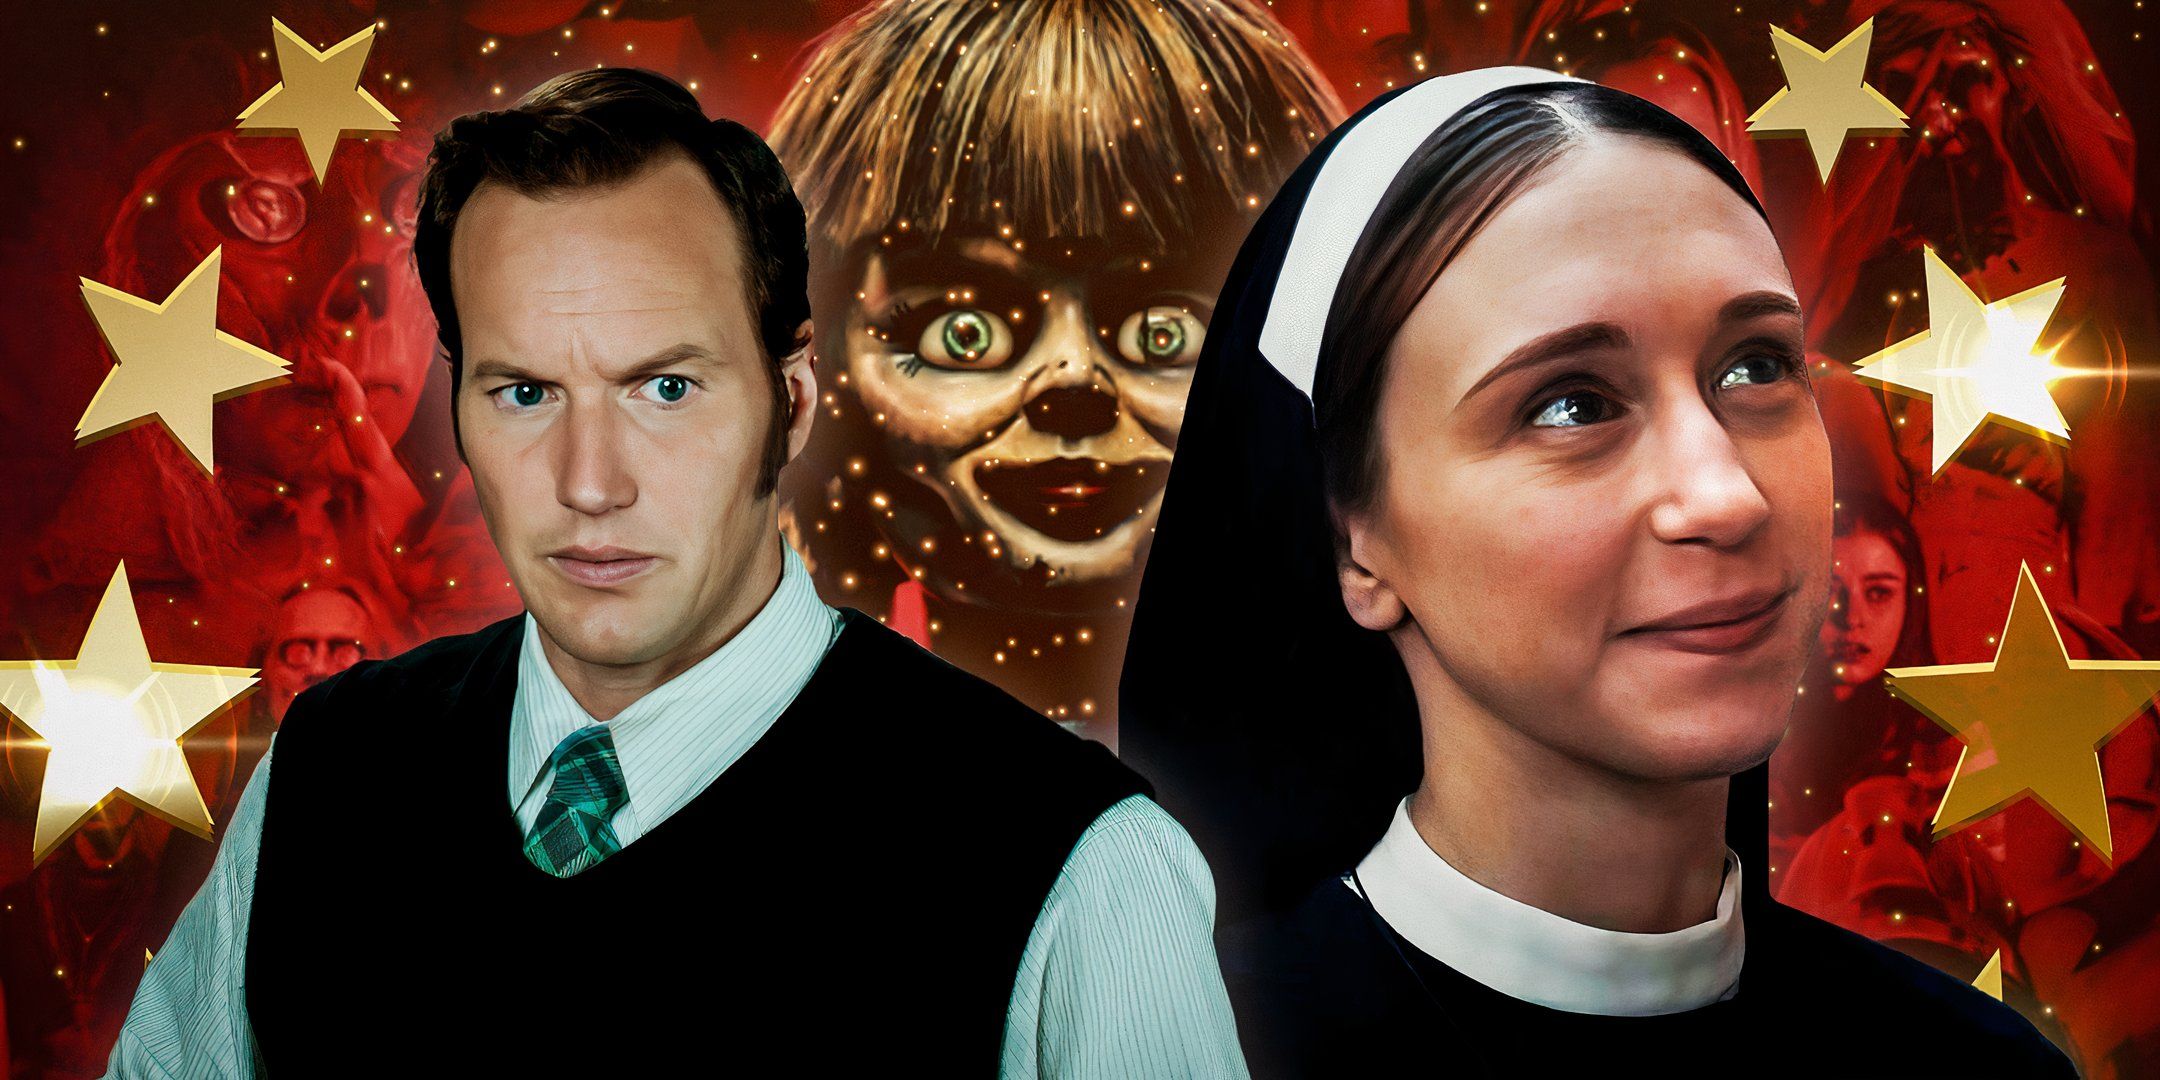 (Taissa-Farmiga-as-Irene)-from-The-Nun-II-and-(Patrick-Wilson-as-Ed-Warren)-from-The-Conjuring-2